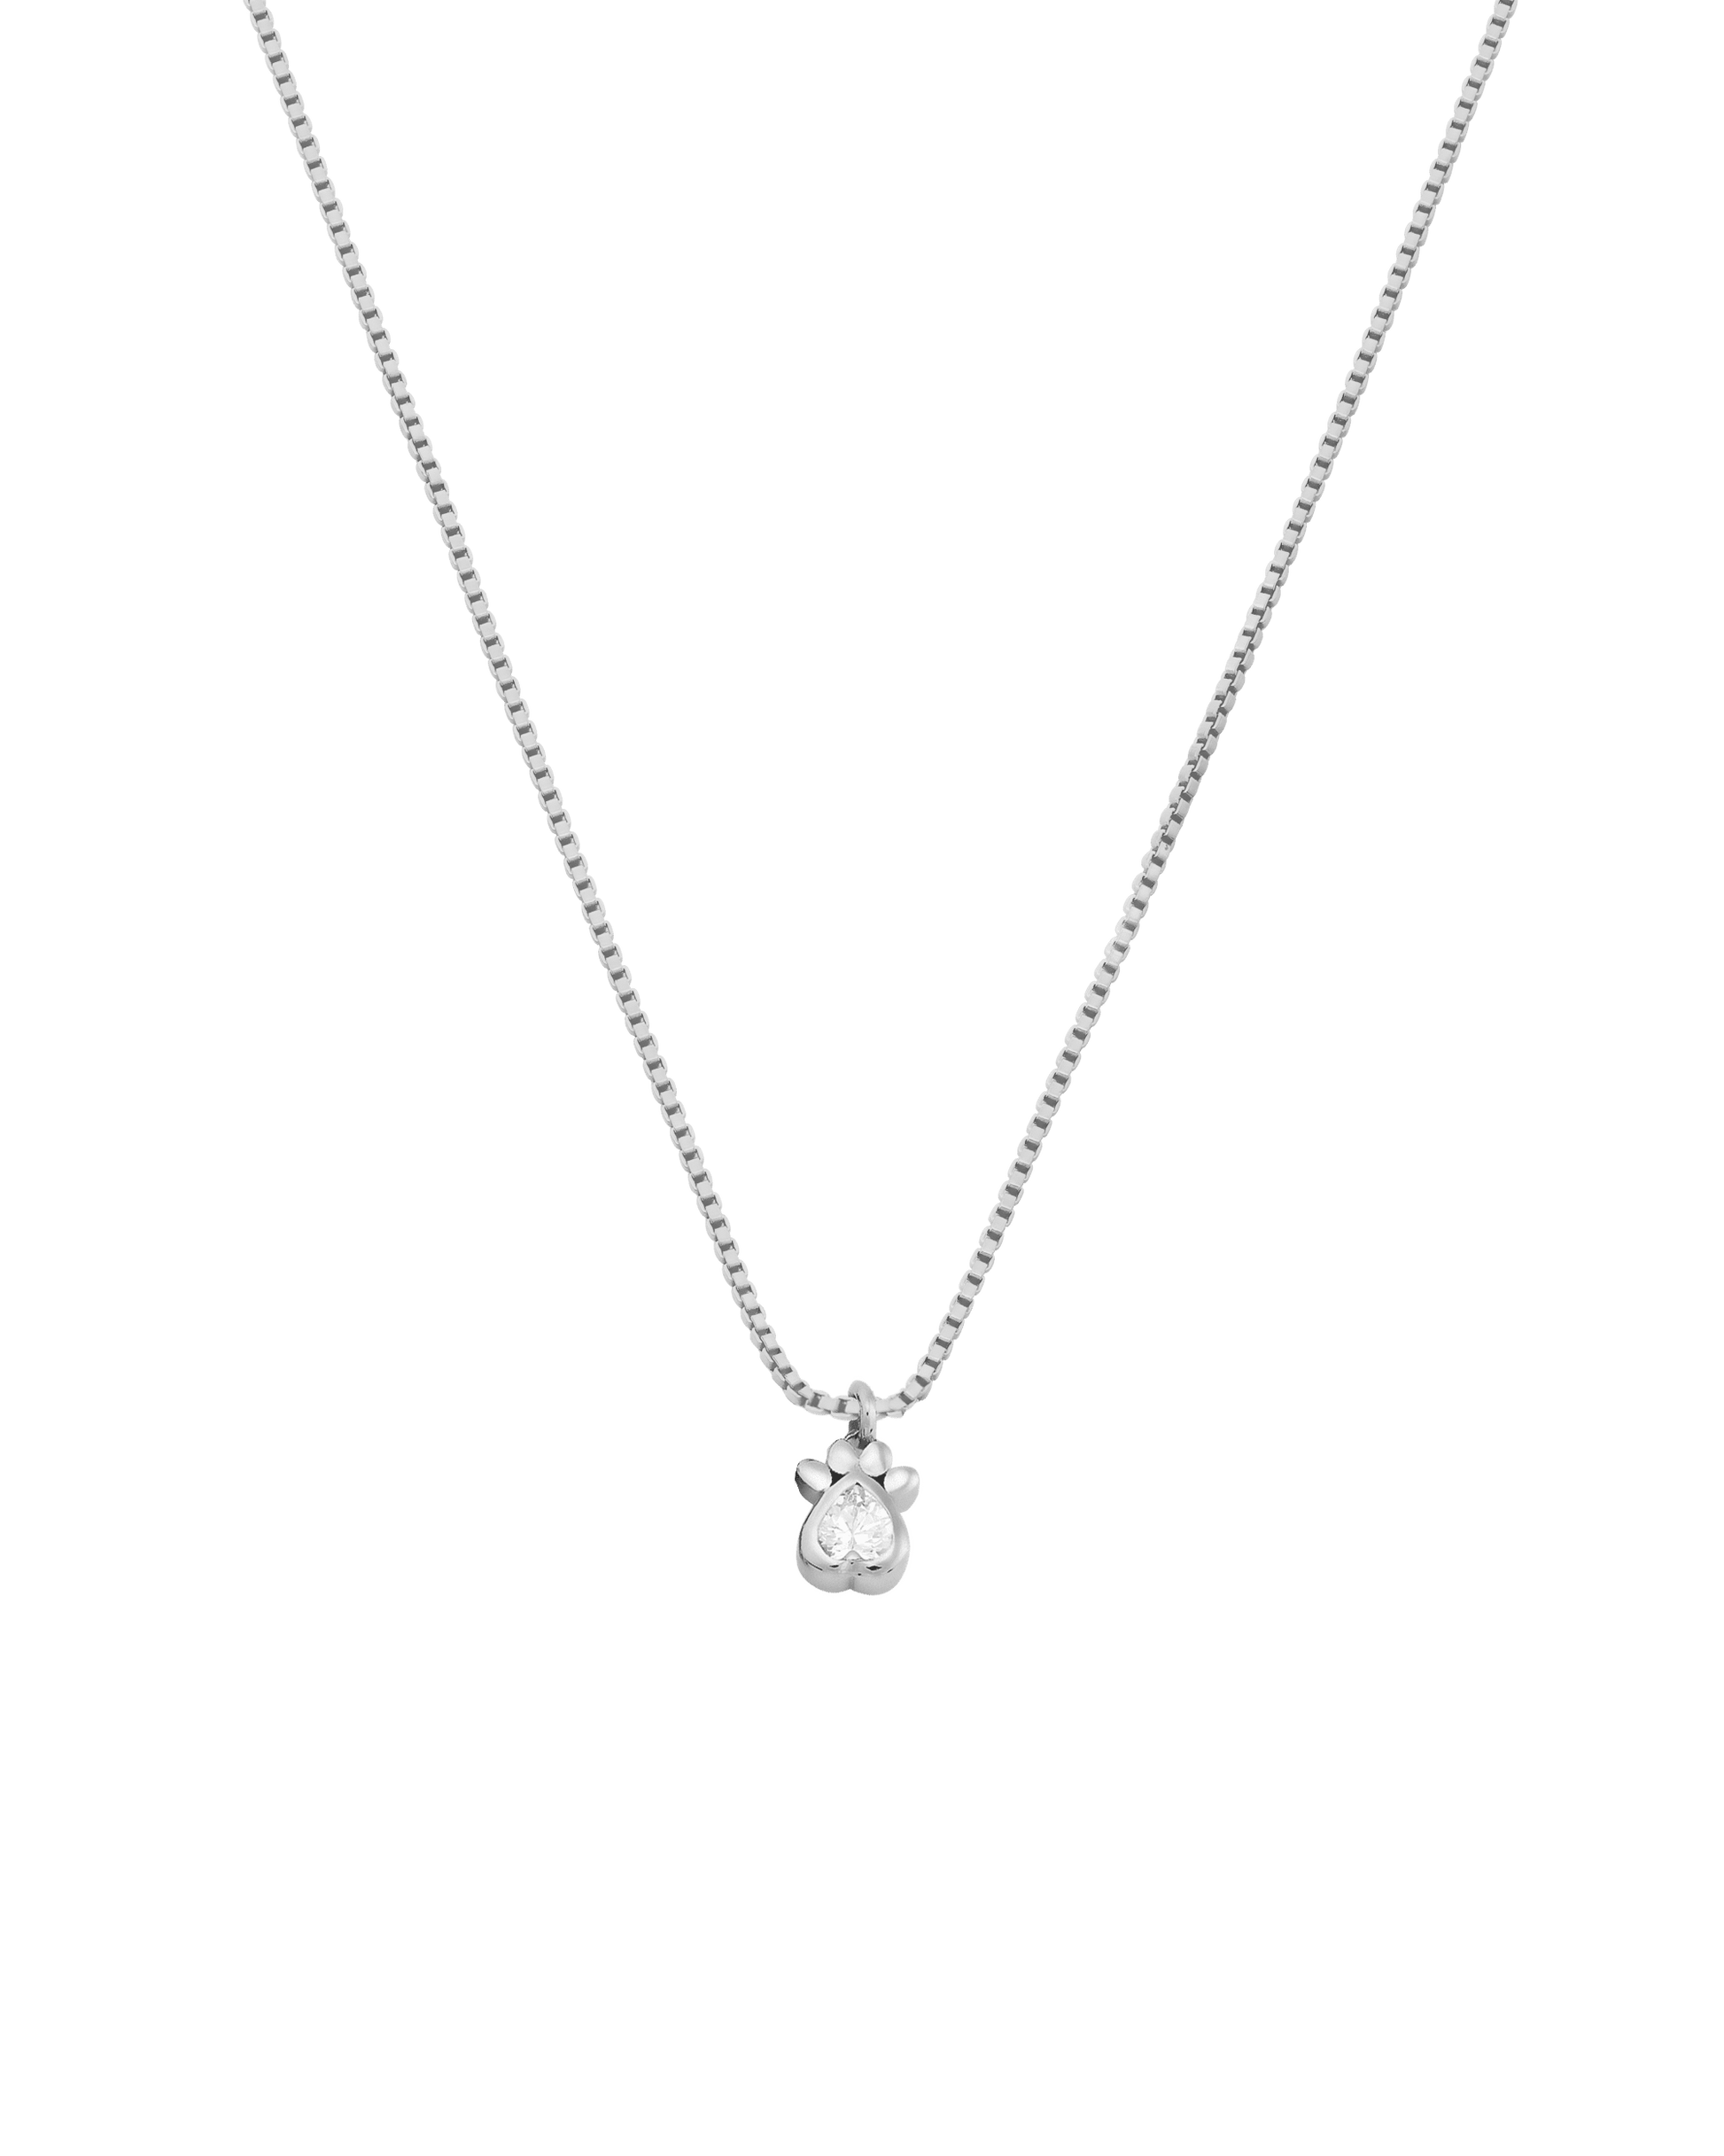 Single Mini Me Necklace - 925 Sterling Silver Necklaces magal-dev 